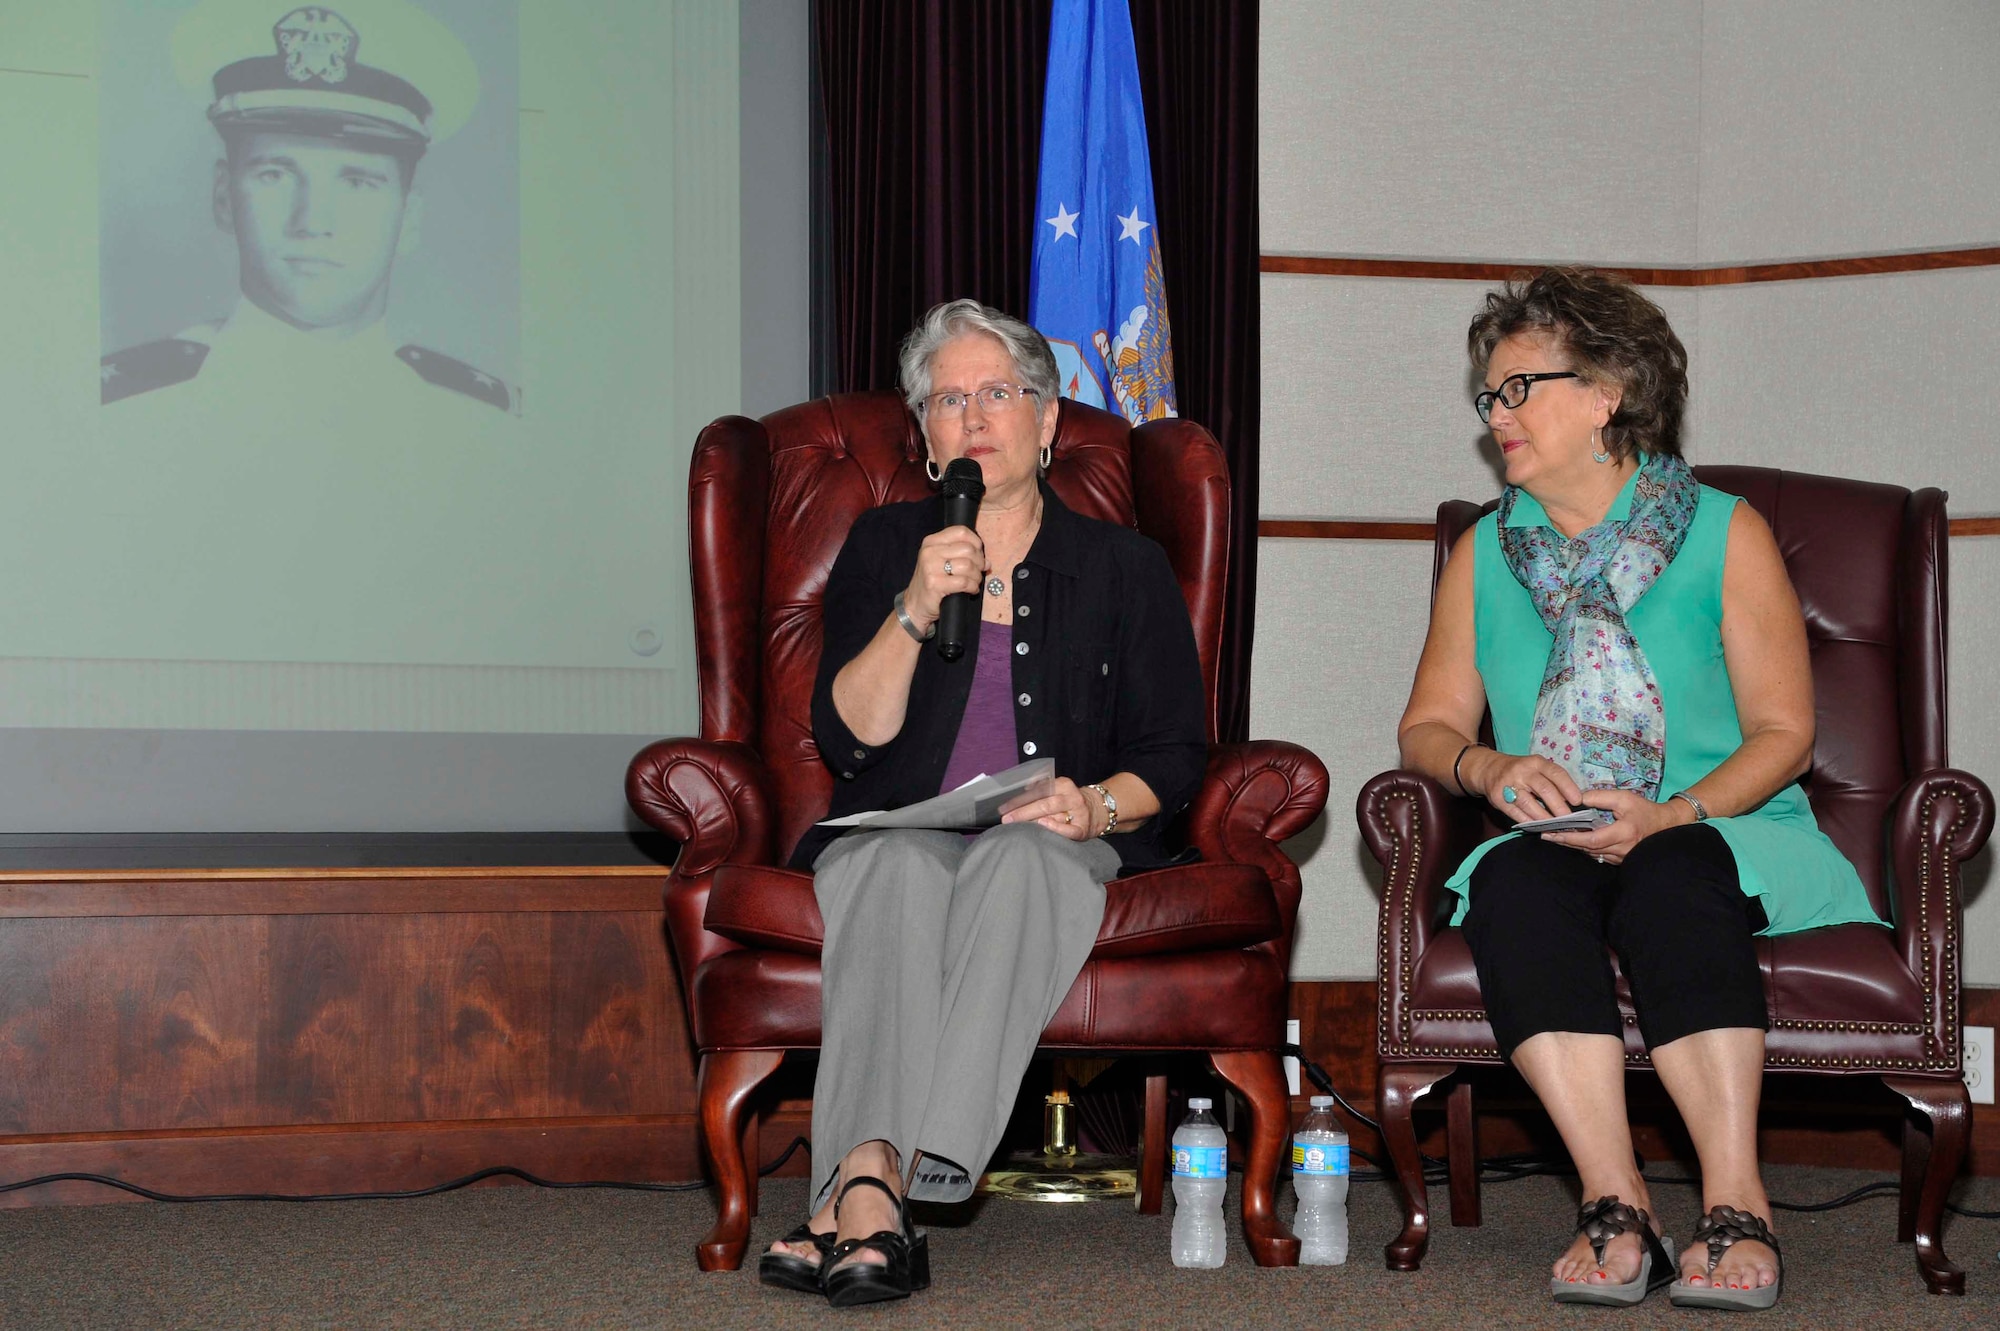 Sandie Anderson, left, and Martha Geiger, cousins of Navy Lt. James B. Mills, a radar intercept operator who was listed as missing in action, Sept. 21, 1966, speak during an MIA/POW event, Sept. 14, 2016, at McConnell Air Force Base, Kan. The women attended to share the story of their cousin and how they’ve dealt with losing him. (U.S. Air Force photo/Airman Erin McClellan)